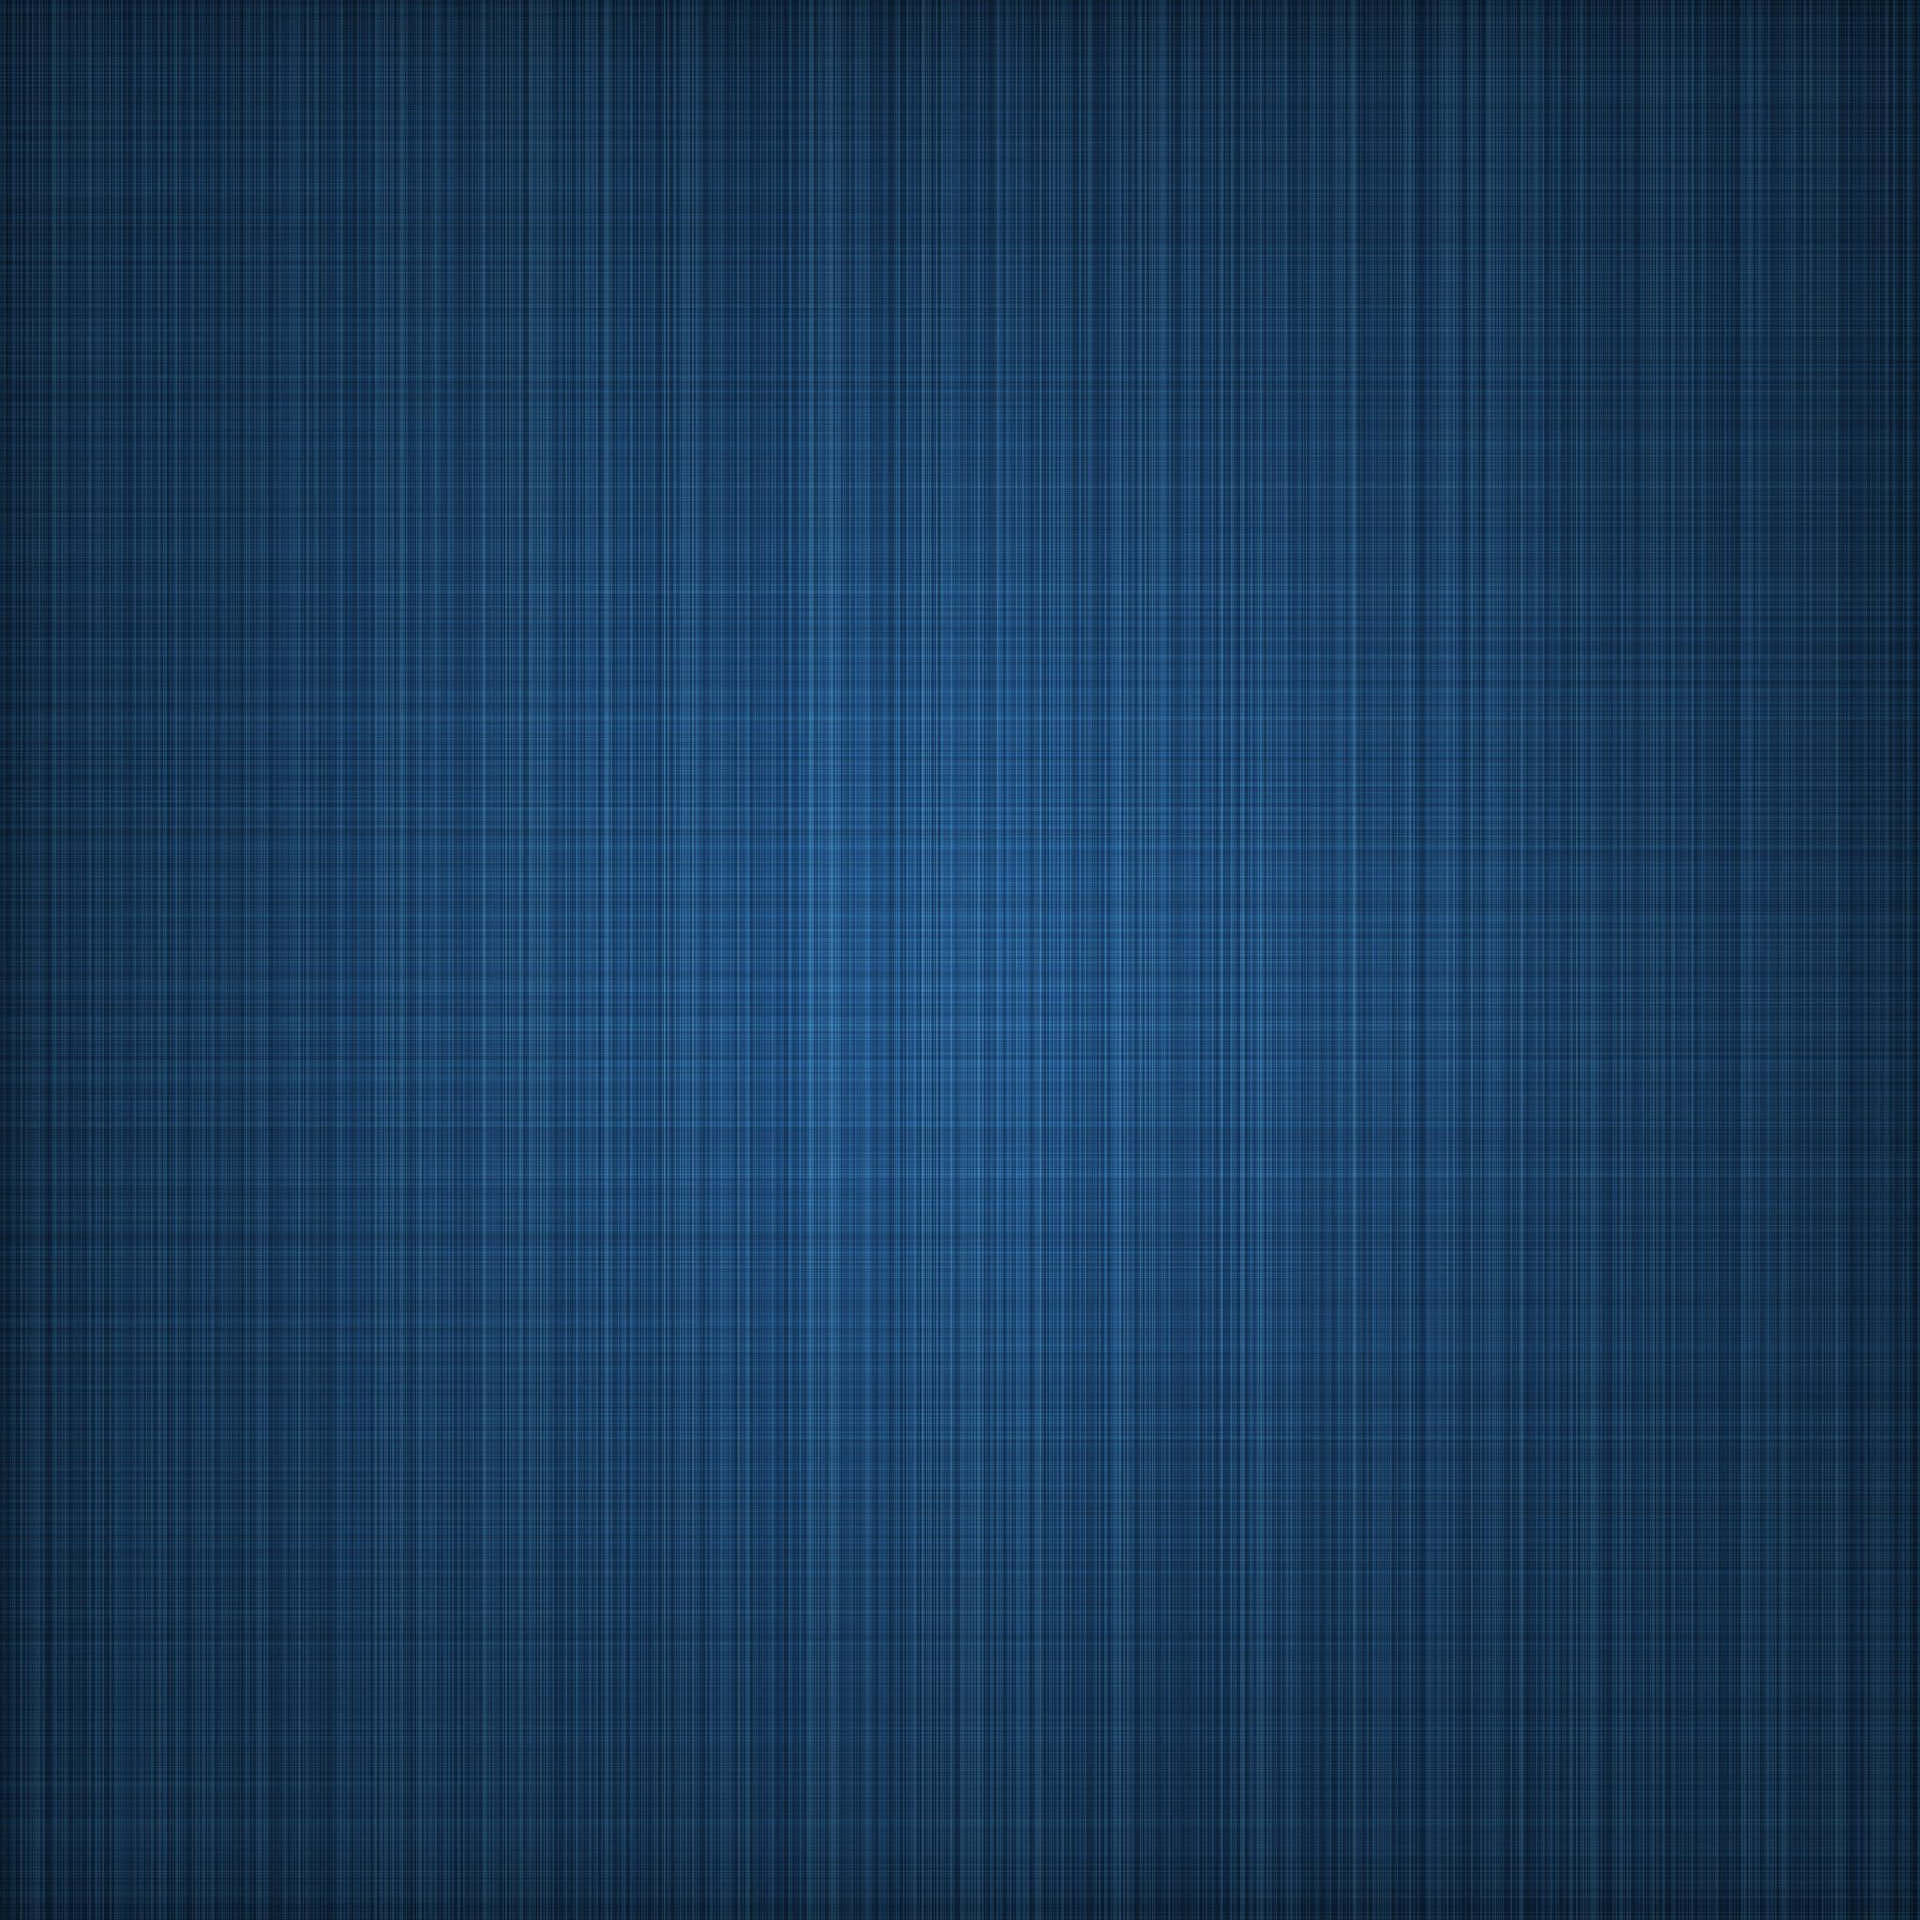 A Blue Background With A Grid Pattern Wallpaper